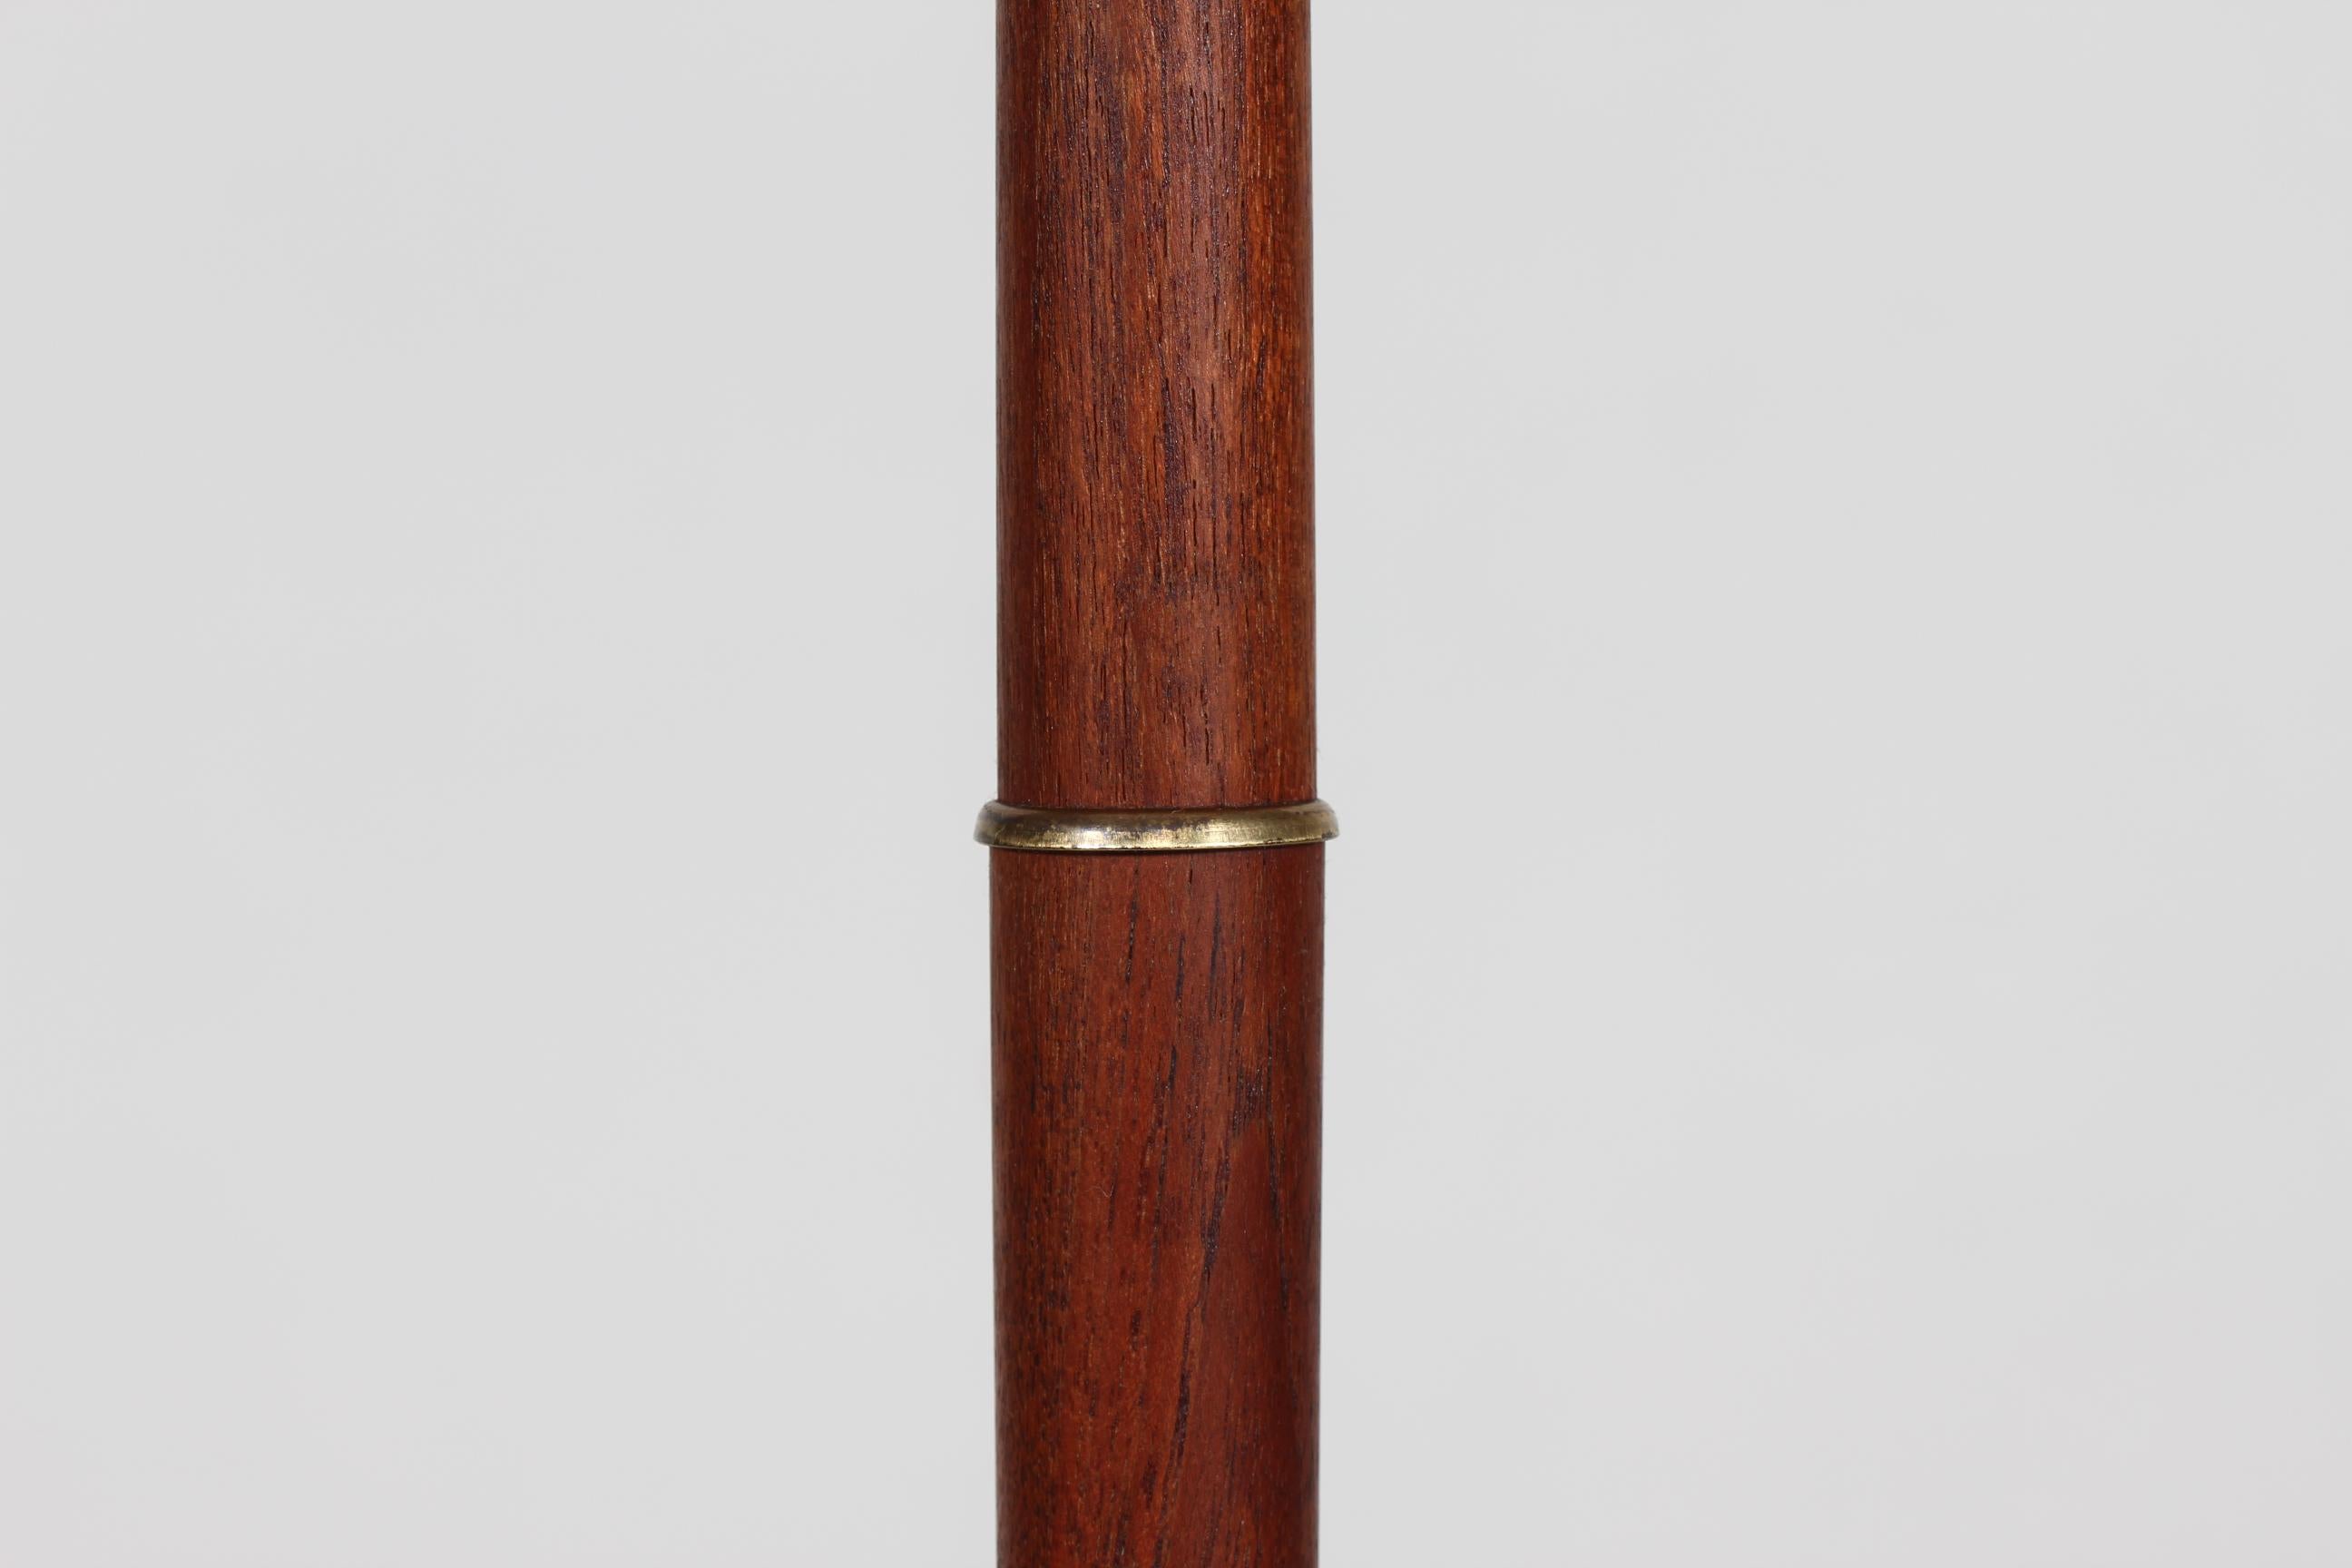 Danish Tripod Floor Lamp by Fog & Mørup made of Teak and Brass with New Shade, Denmark